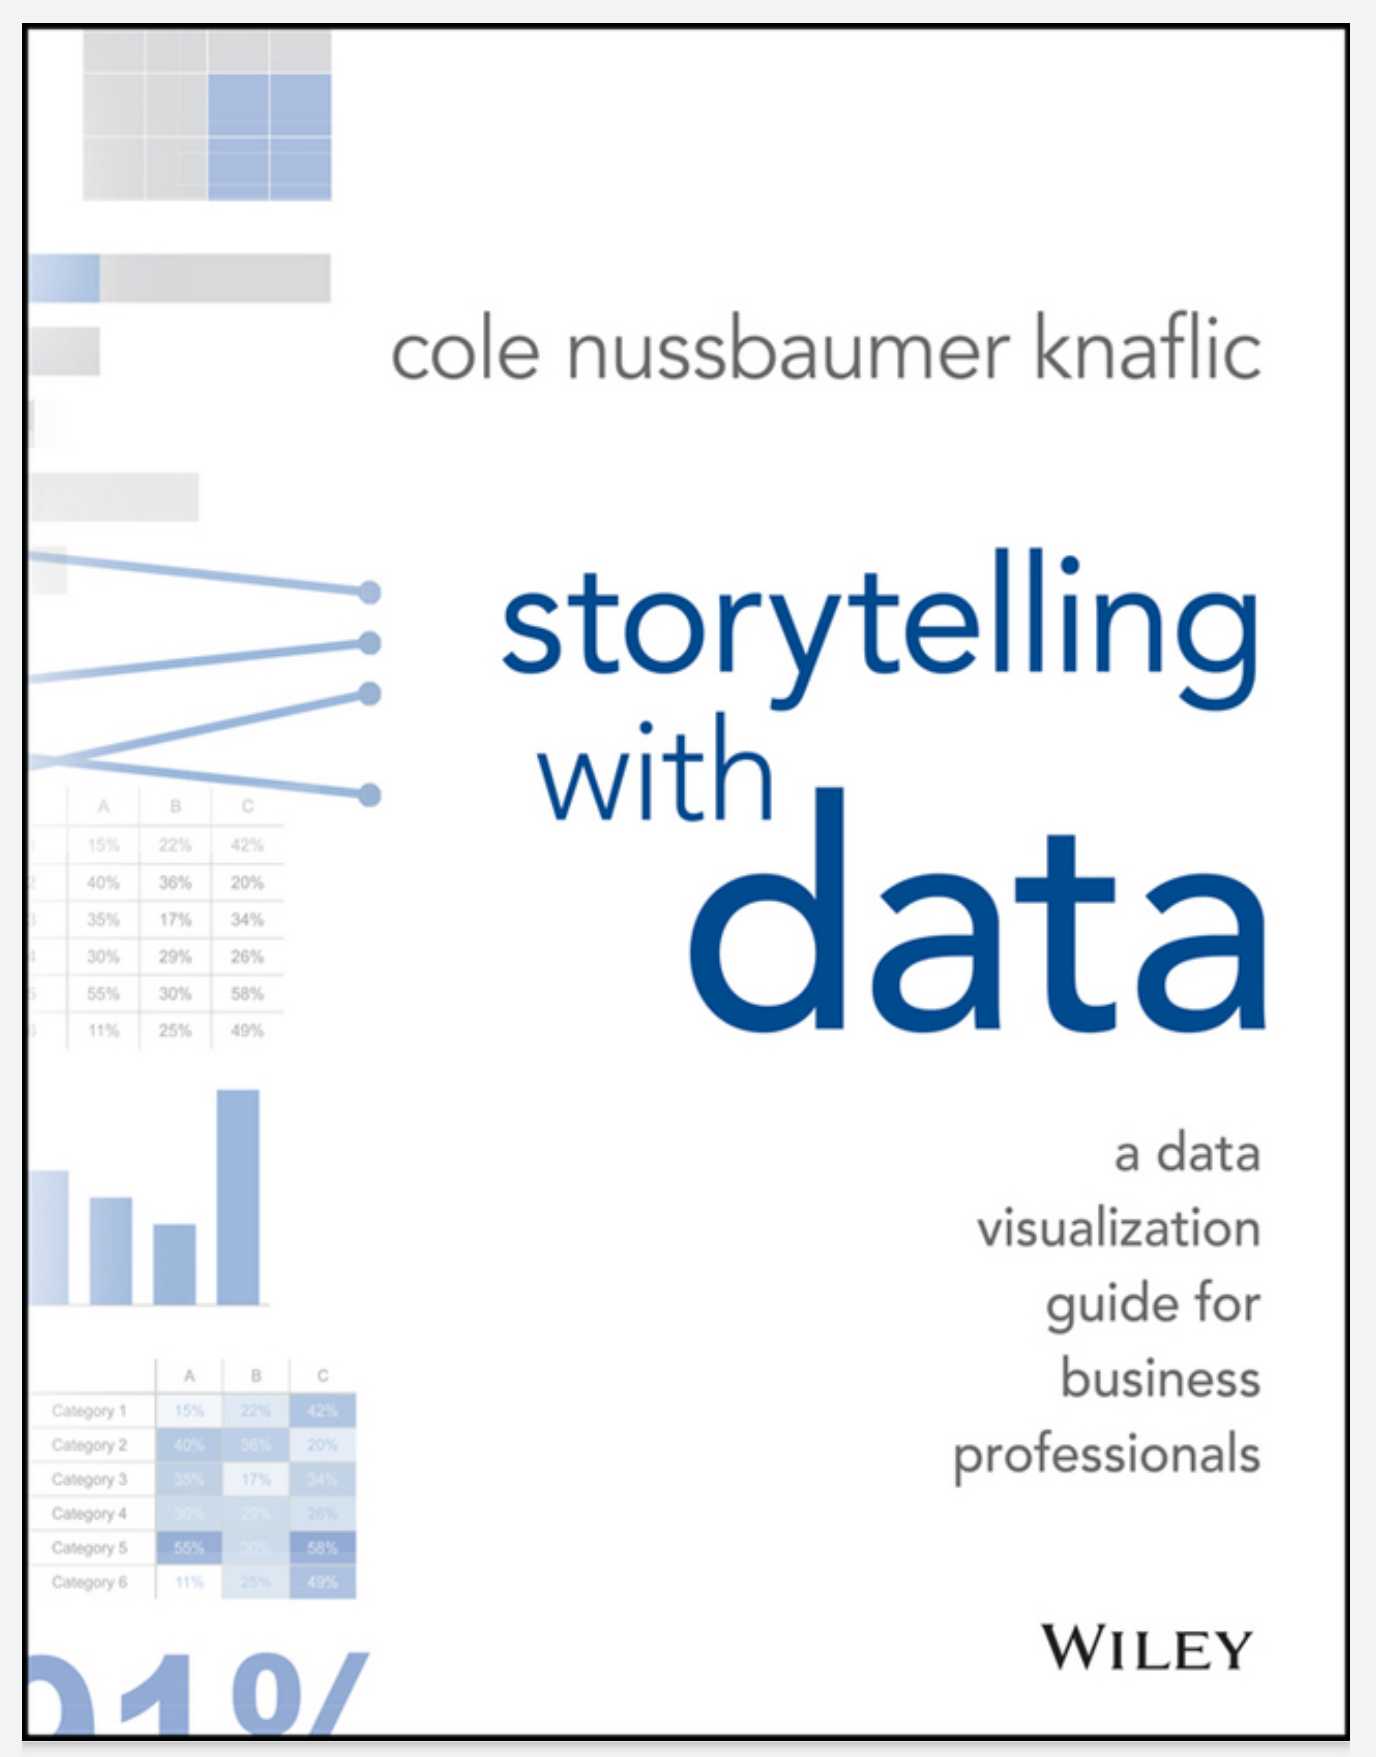 Storytelling with data a data visualization guide for business professionals